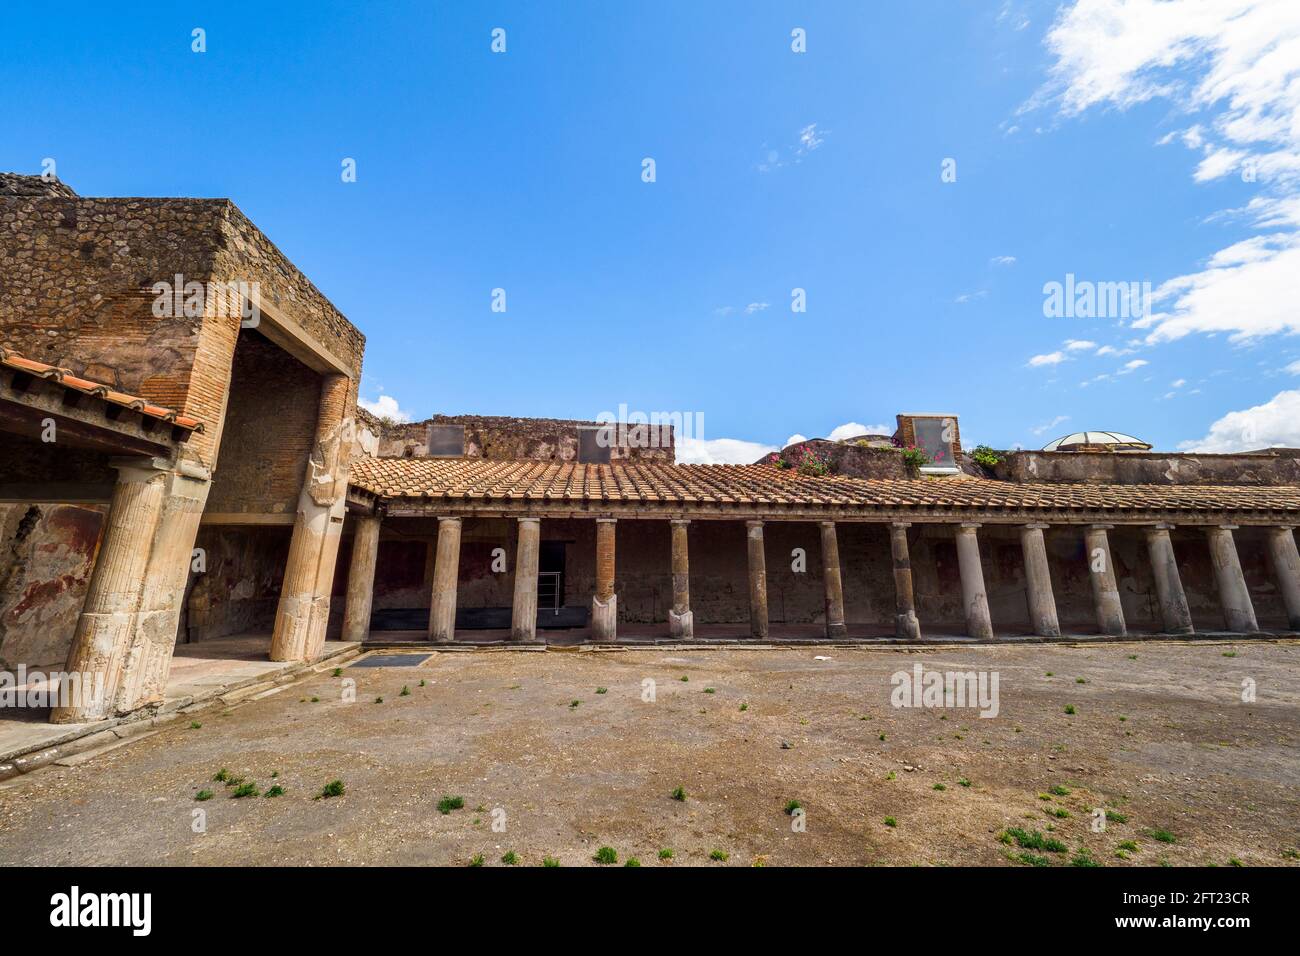 Portico in the Stabian Baths (terme Stabiane) - Pompeii archaeological site, Italy Stock Photo